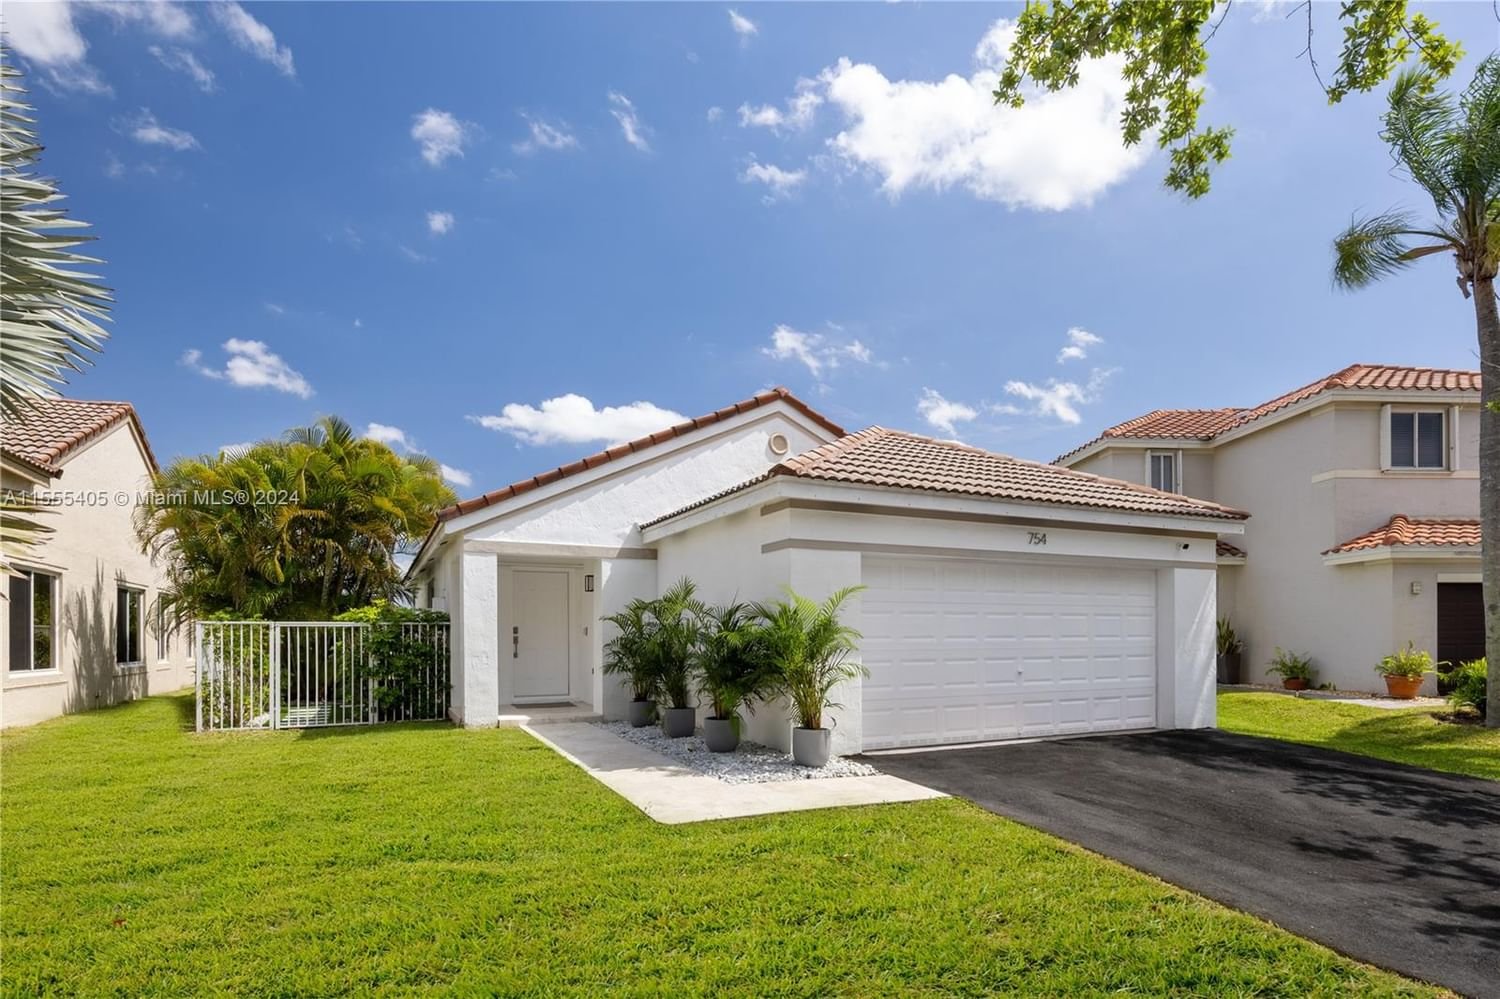 Real estate property located at 754 San Remo Dr, Broward County, SECTORS 3 & 4 BOUNDARY PL, Weston, FL